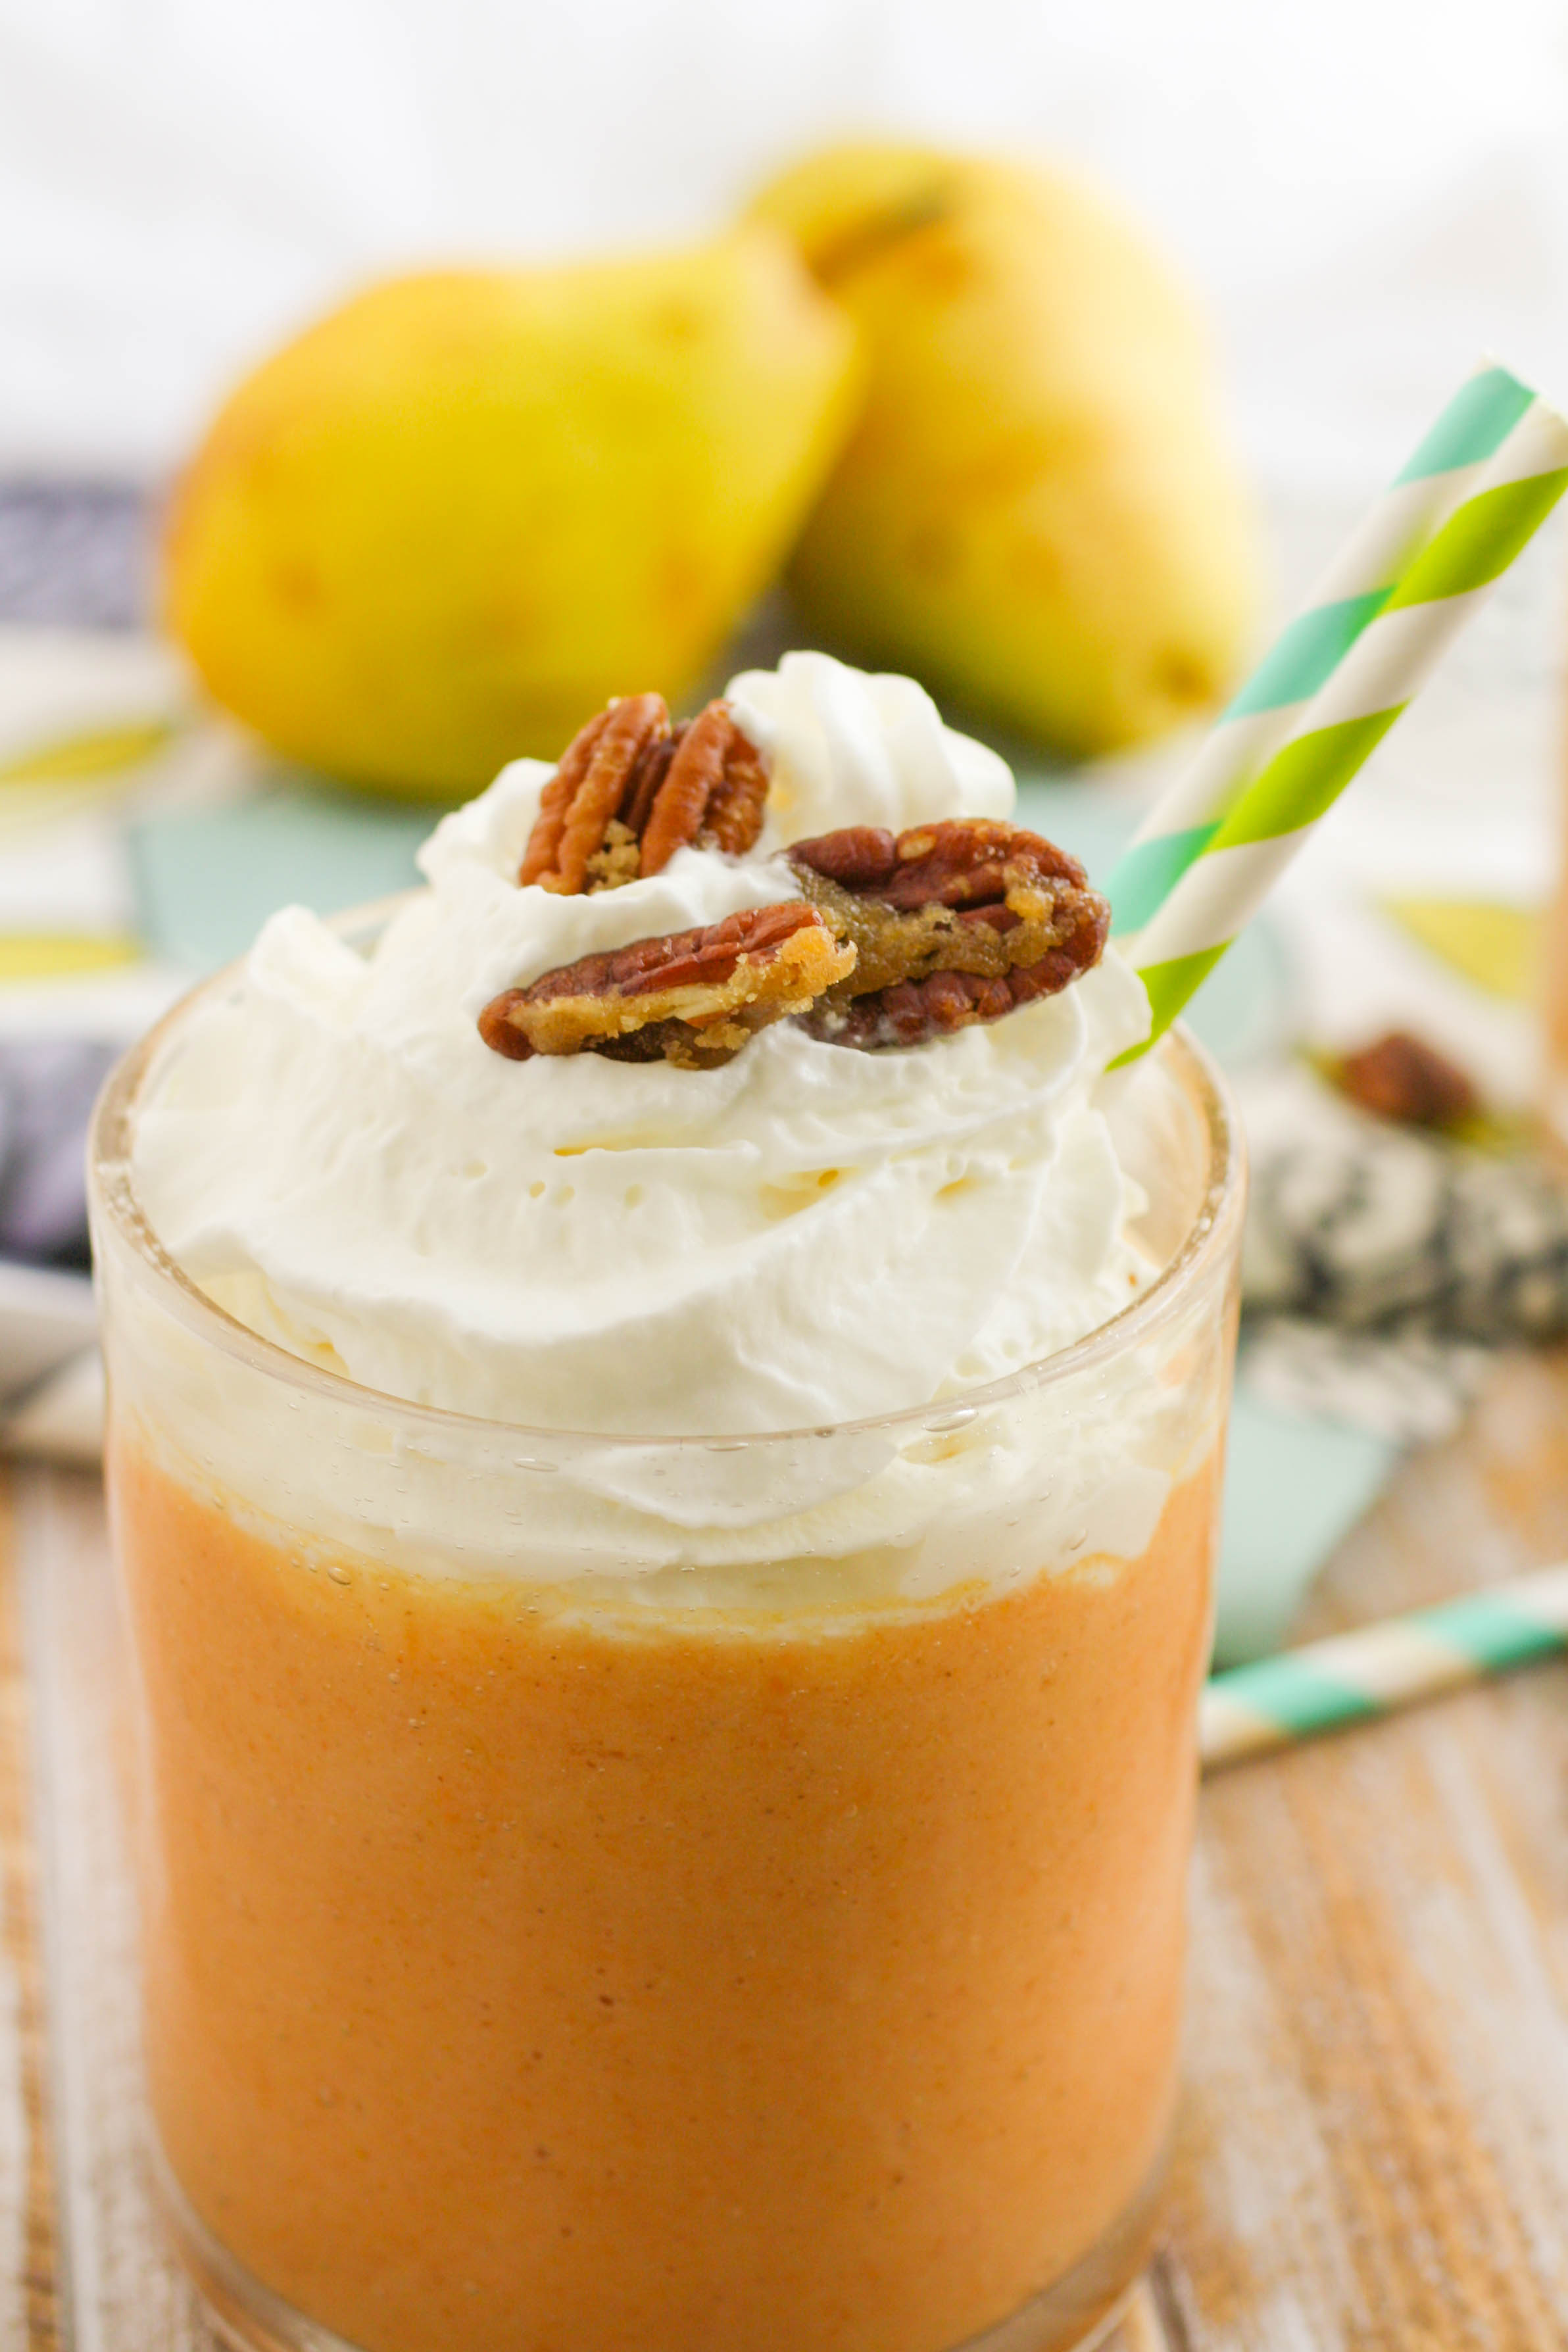 Sweet Potato-Pear Smoothies with Candied Pecans are perfect for the a.m., and make a nice dessert, too! You'll love these sweet potato and pear smoothies!